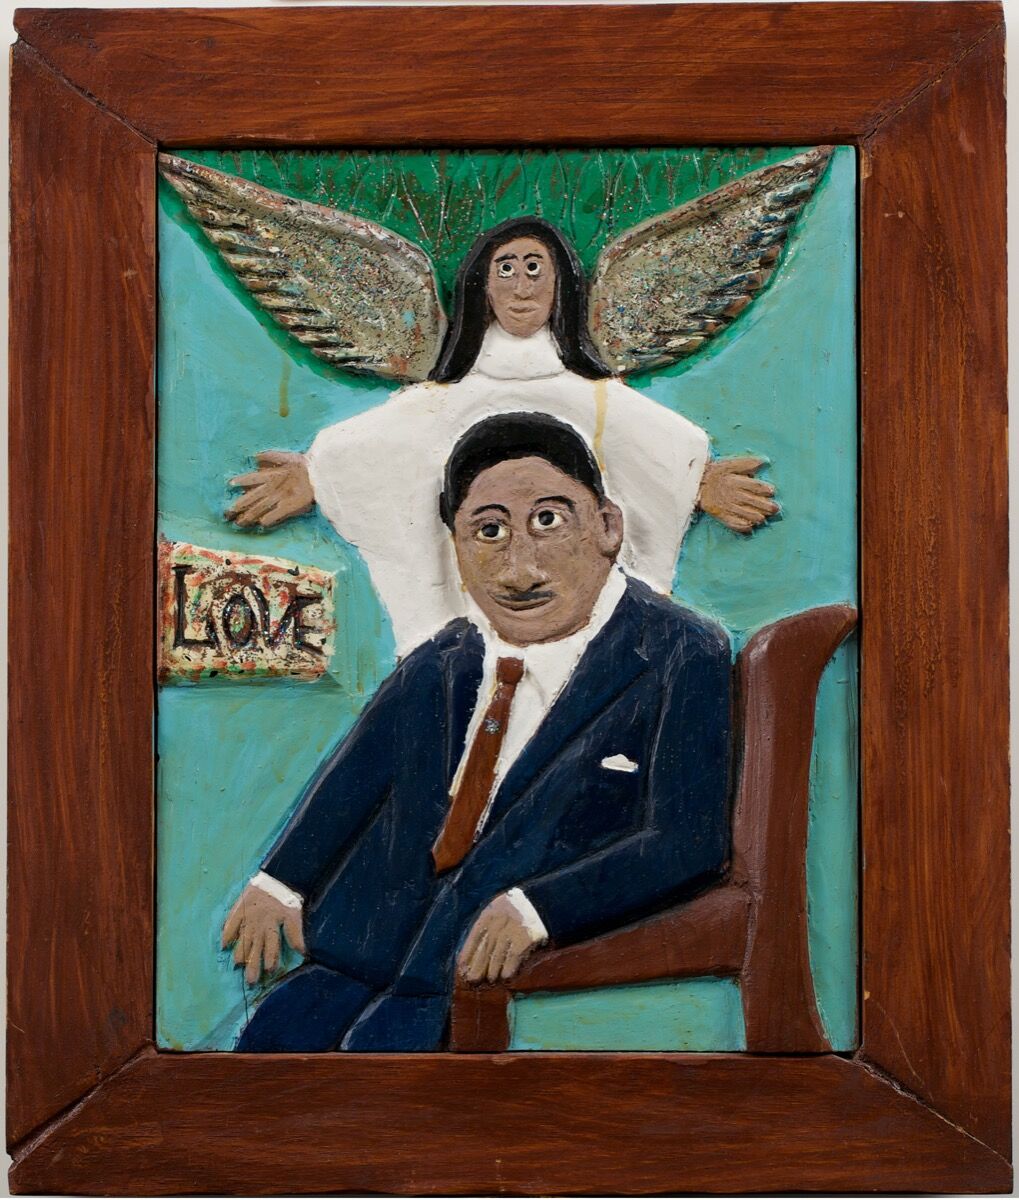 Elijah Pierce, Love (Martin Luther King, Jr.), Unknown. Paint, glitter, varnish on wood. The Collection of Jill and Sheldon Bonovitz. Promised gift to the Philadelphia Museum of Art. Courtesy of the Barnes Foundation.